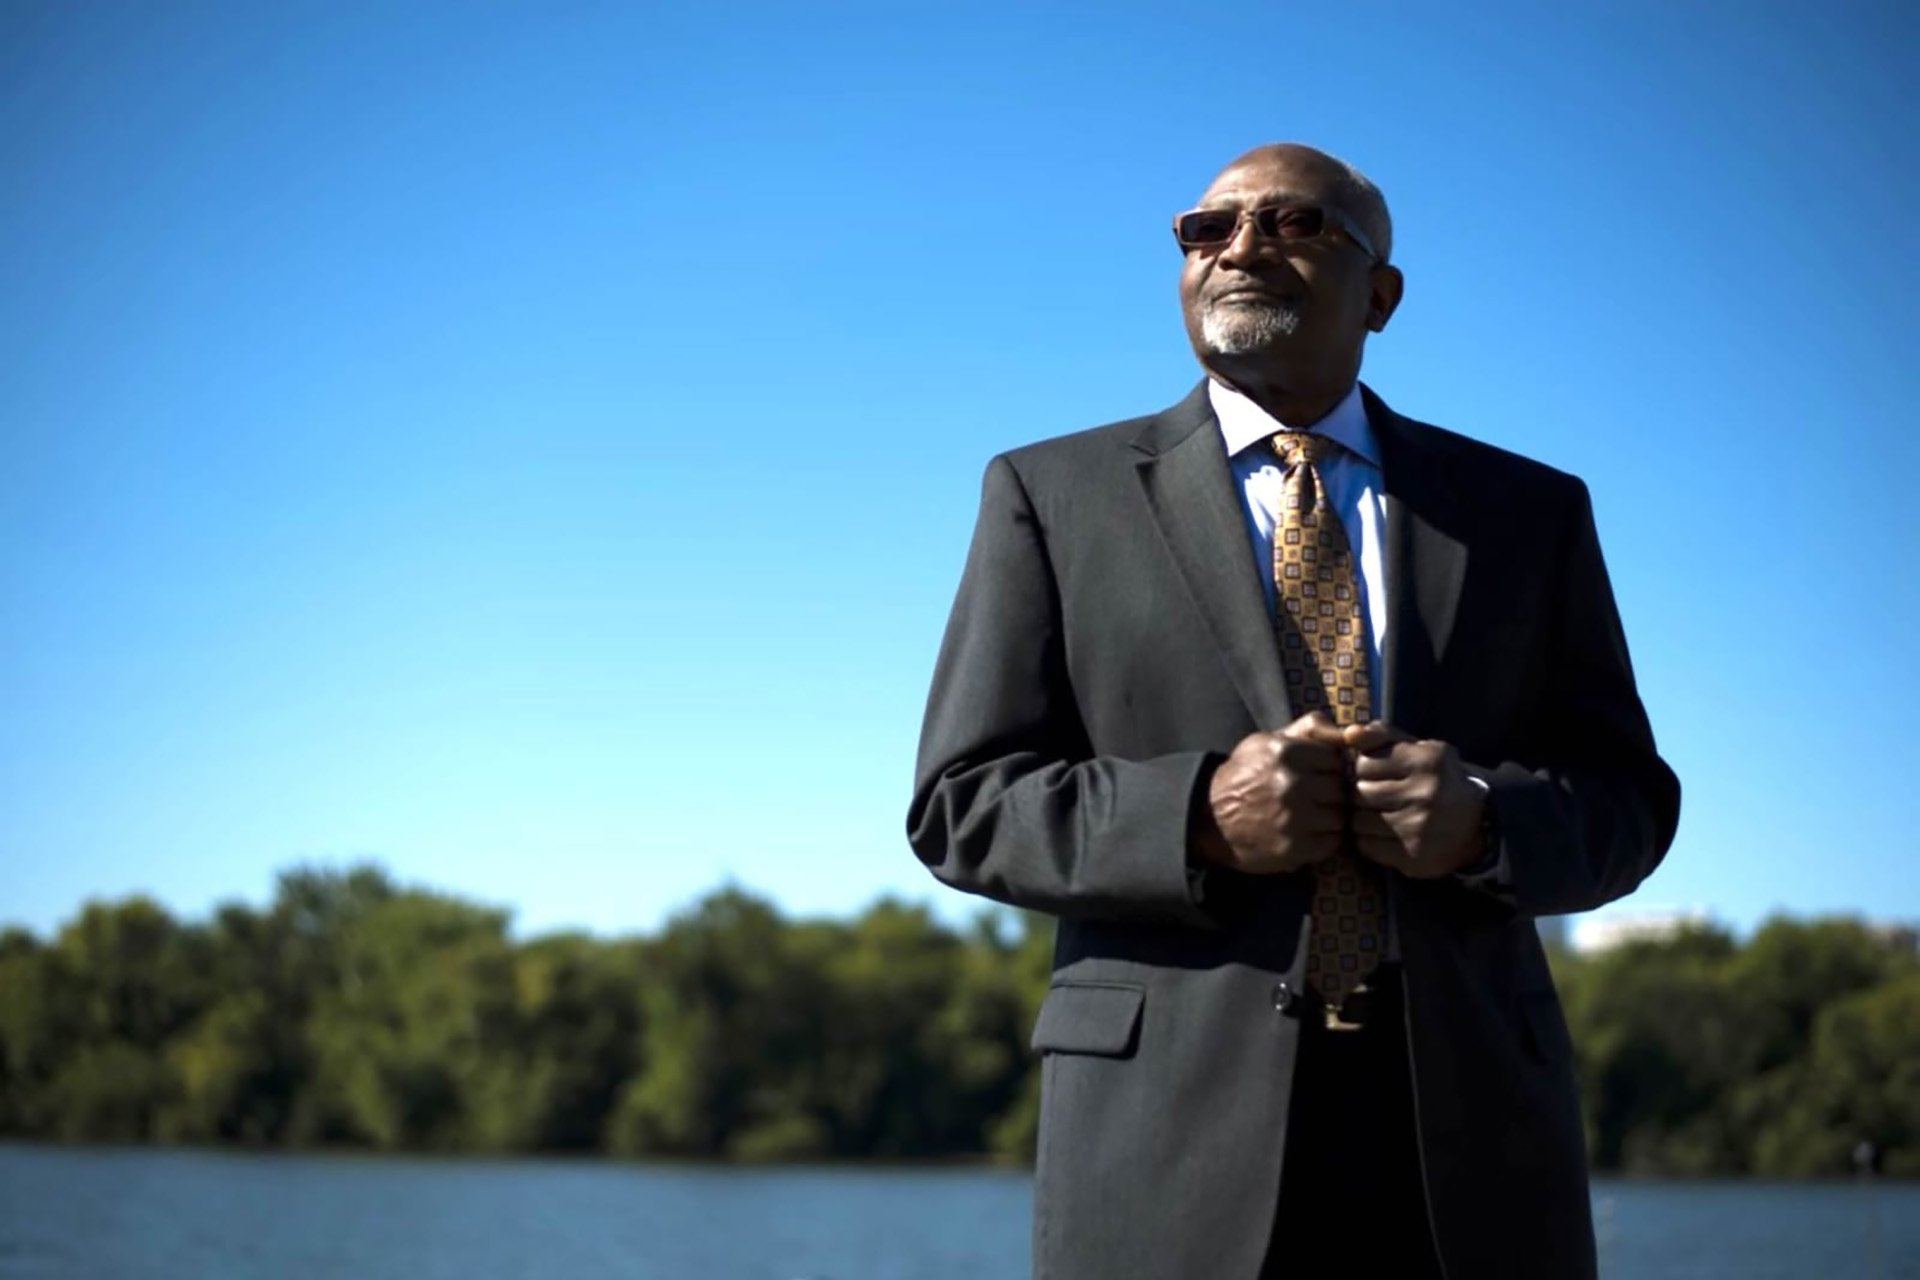 A portrait of Robert Bullard wearing a suit and sunglasses, standing in front of a pond edged with green trees under a clear blue sky